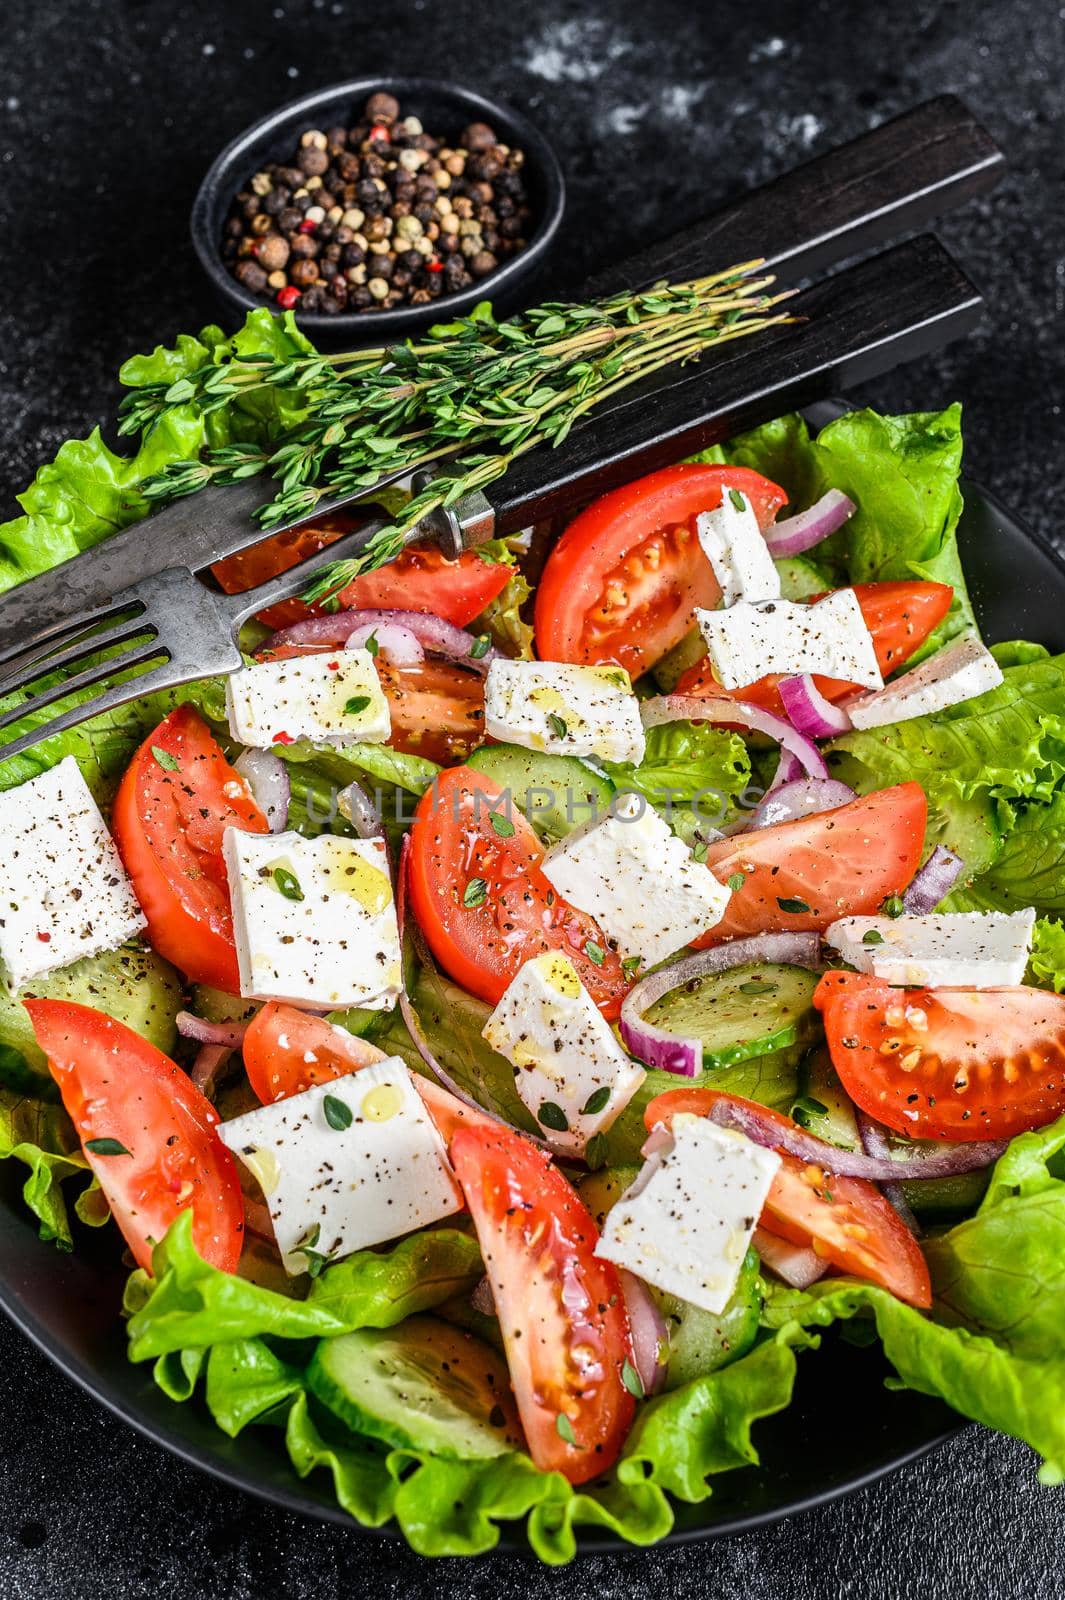 Bowl of ready-to-eat Greek salad. Black background. Top view by Composter